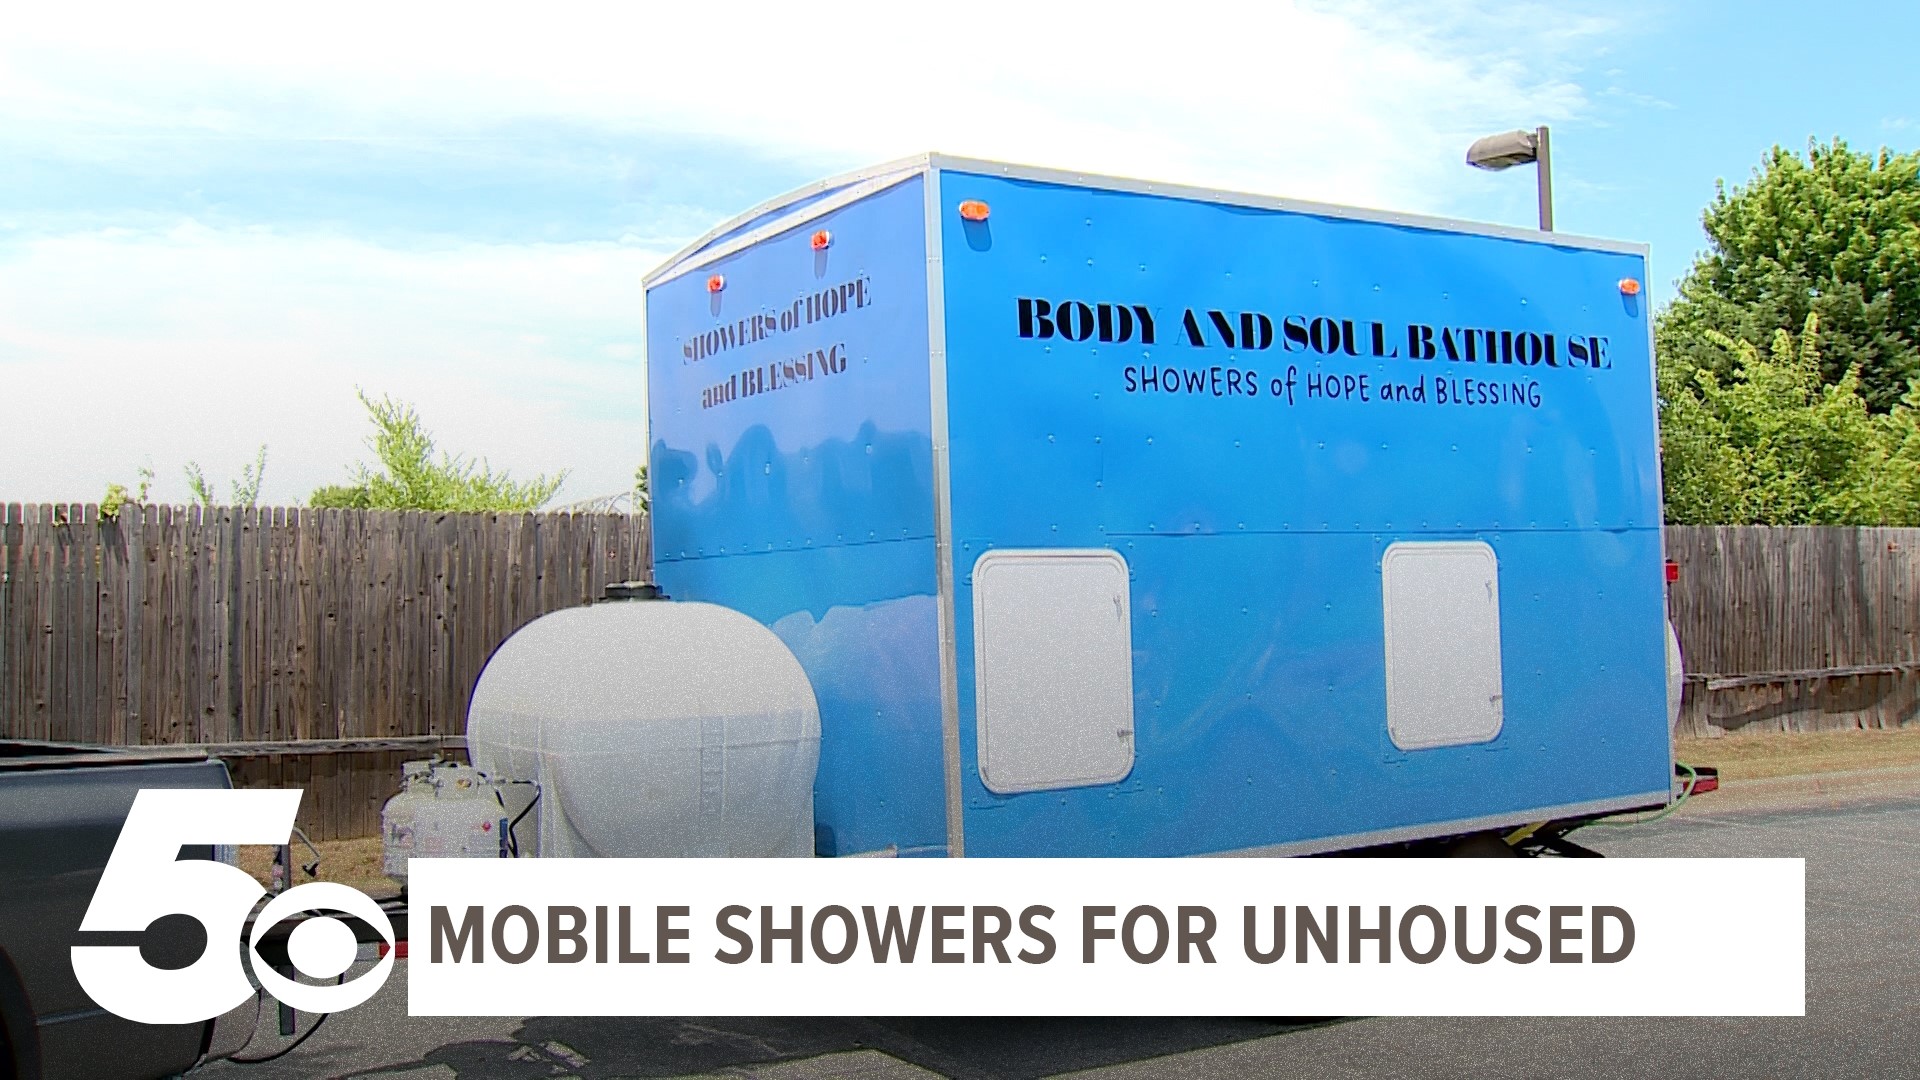 Bradley Clyne, founder and director of Every Soul Matters Ministries is bringing mobile showers to the unhoused population and plans to open a mobile medical center.